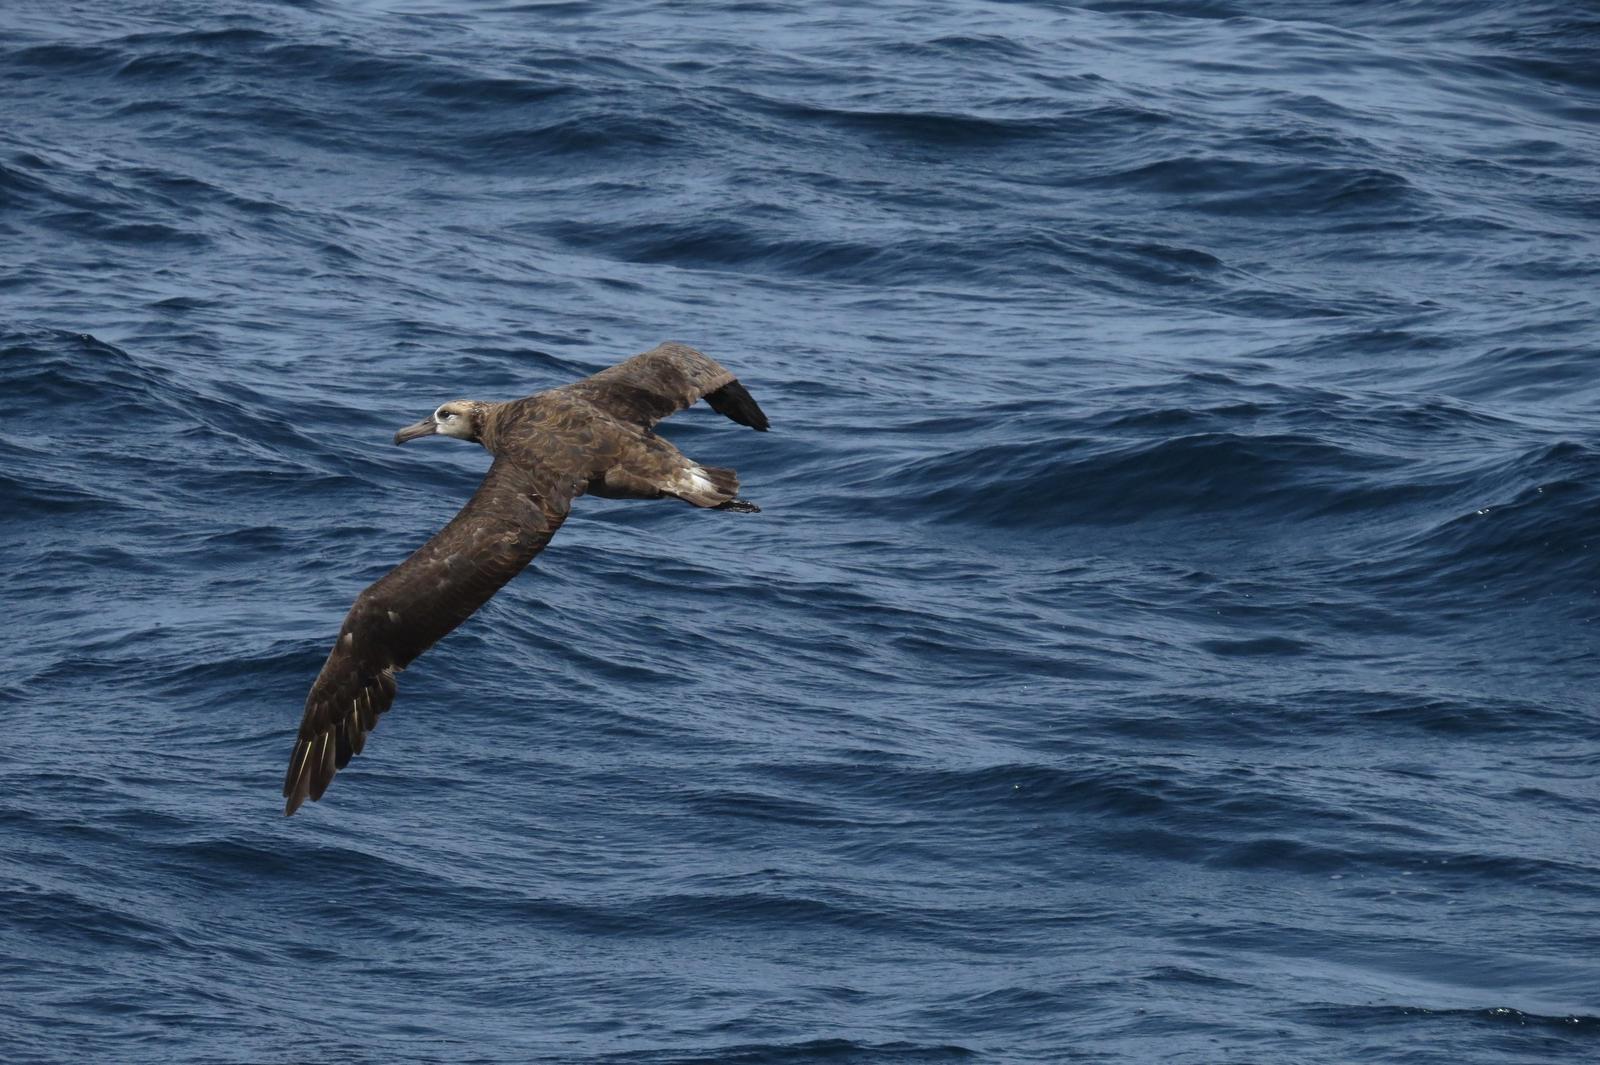 Black-footed Albatross Photo by Jeff Harding